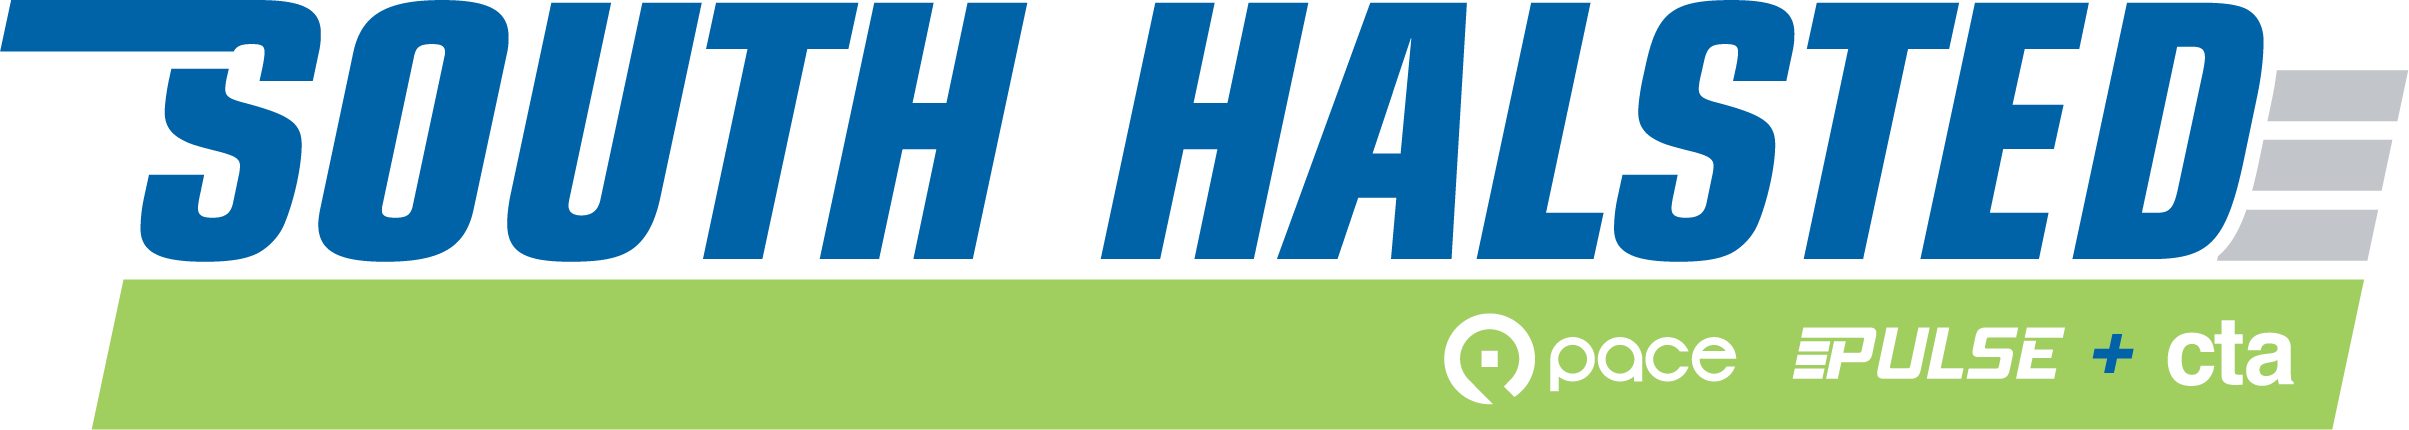 Image of South Halsted logo